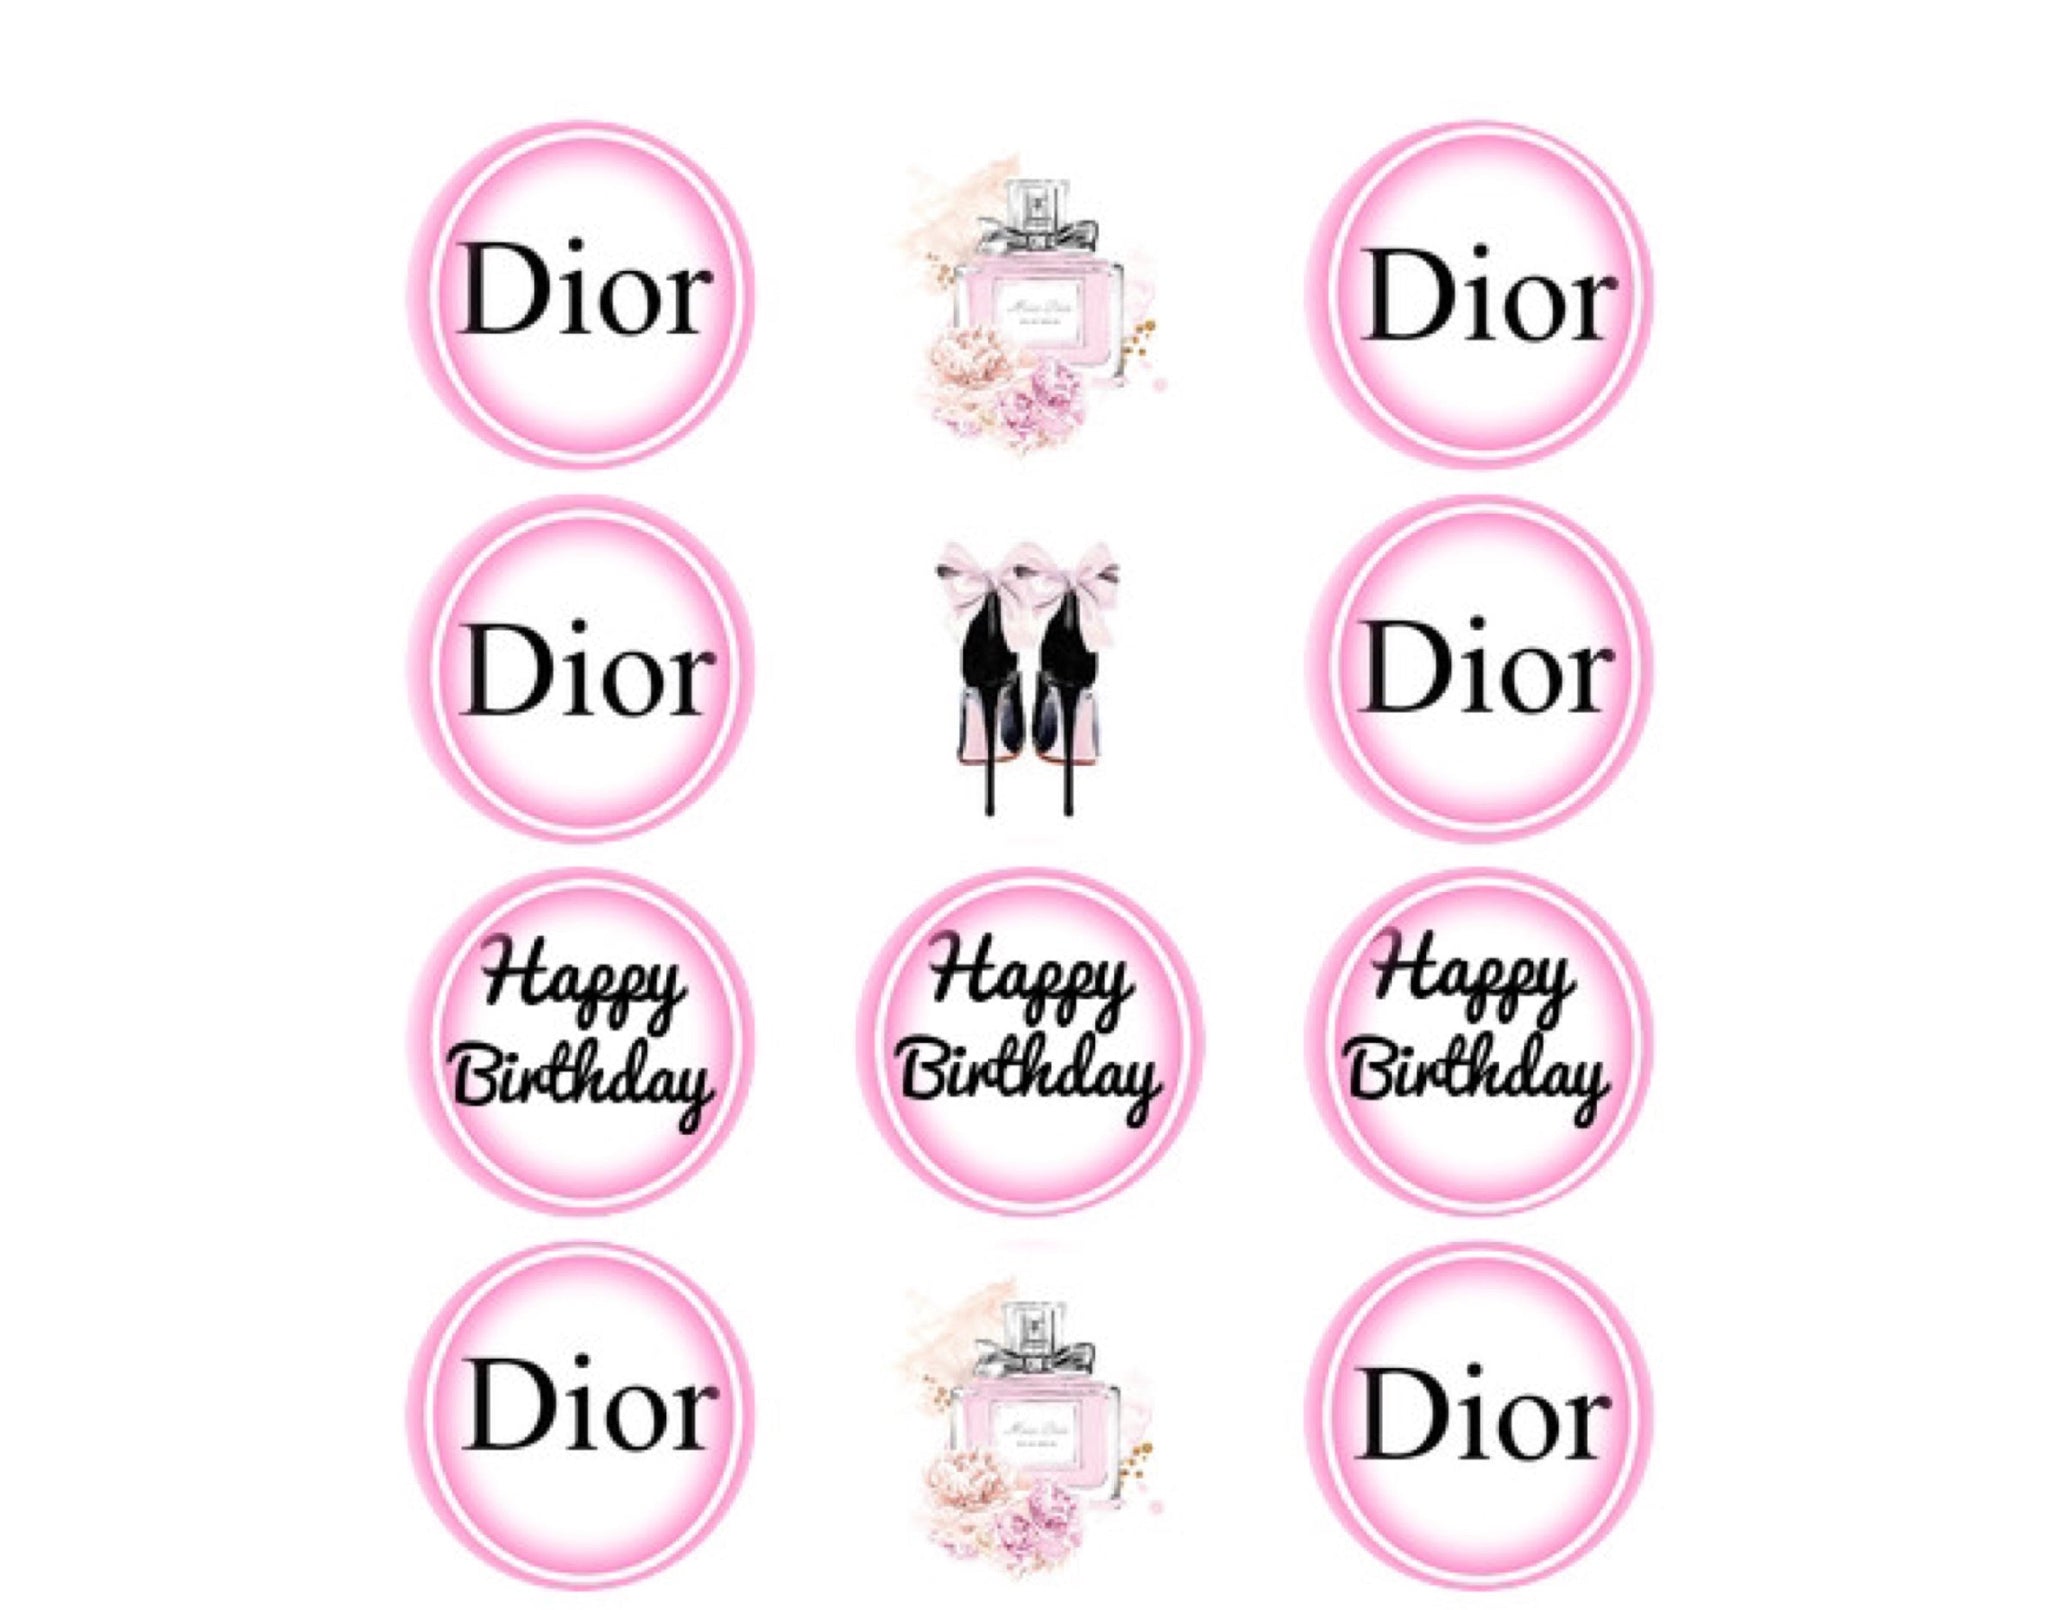 12 PRE CUT Pink CD Inspired EDIBLE Cupcake Toppers